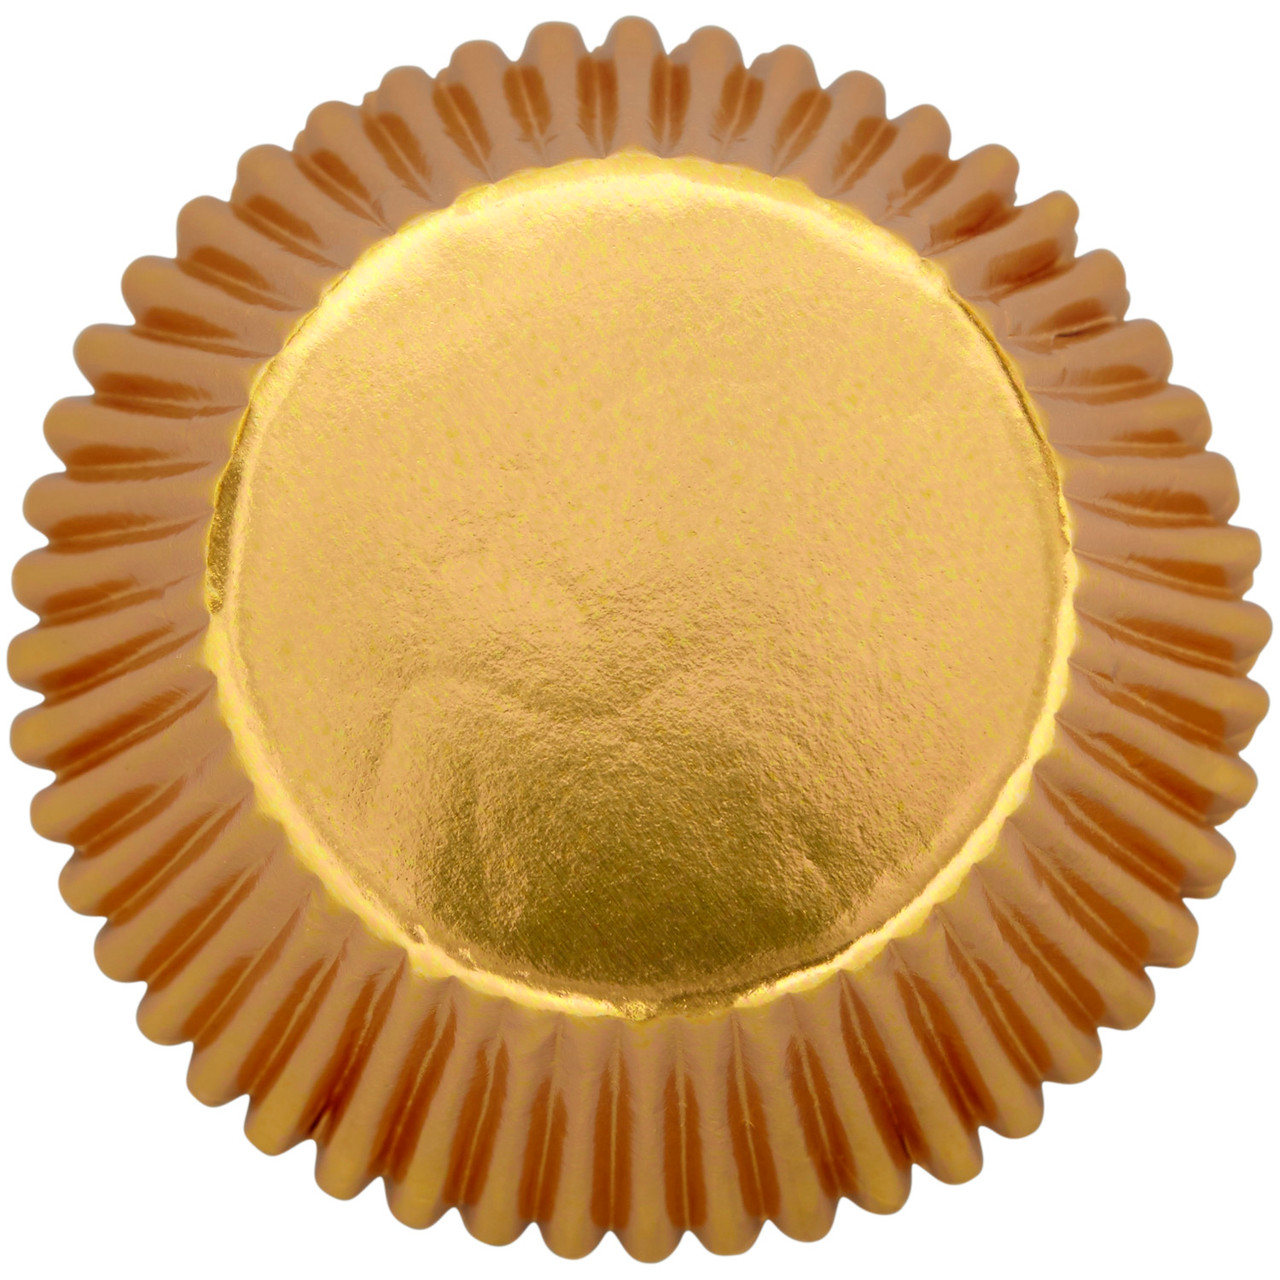 STANDARD Foil Cupcake Liners / Baking Cups – 50 ct GOLD – Cake Connection